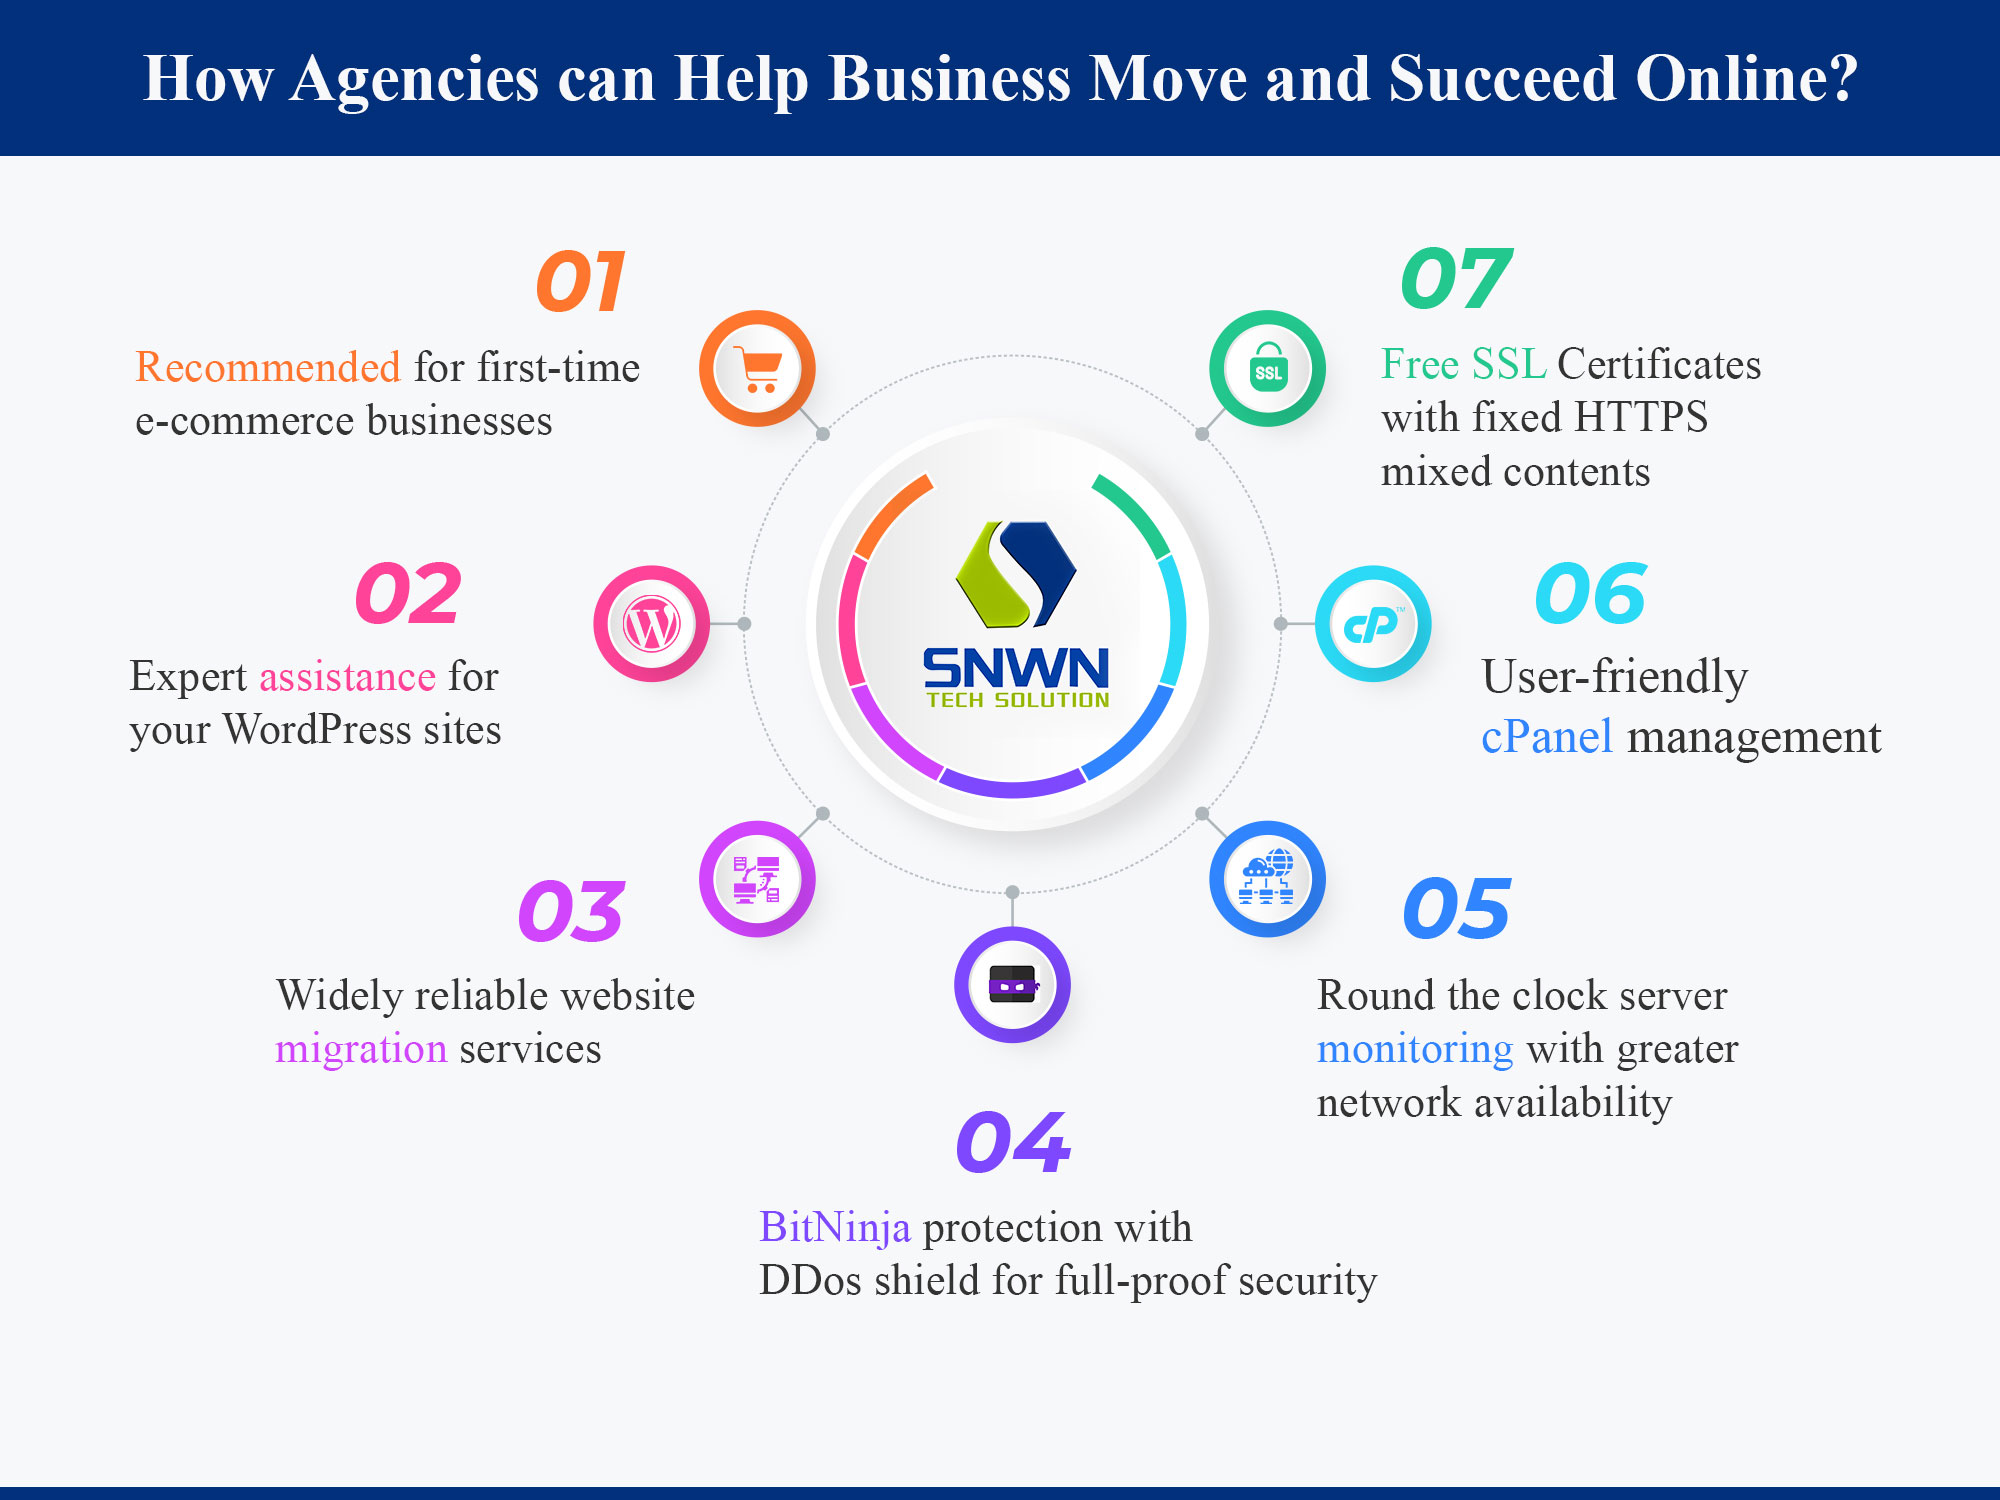 How agencies can help business move and succeed online